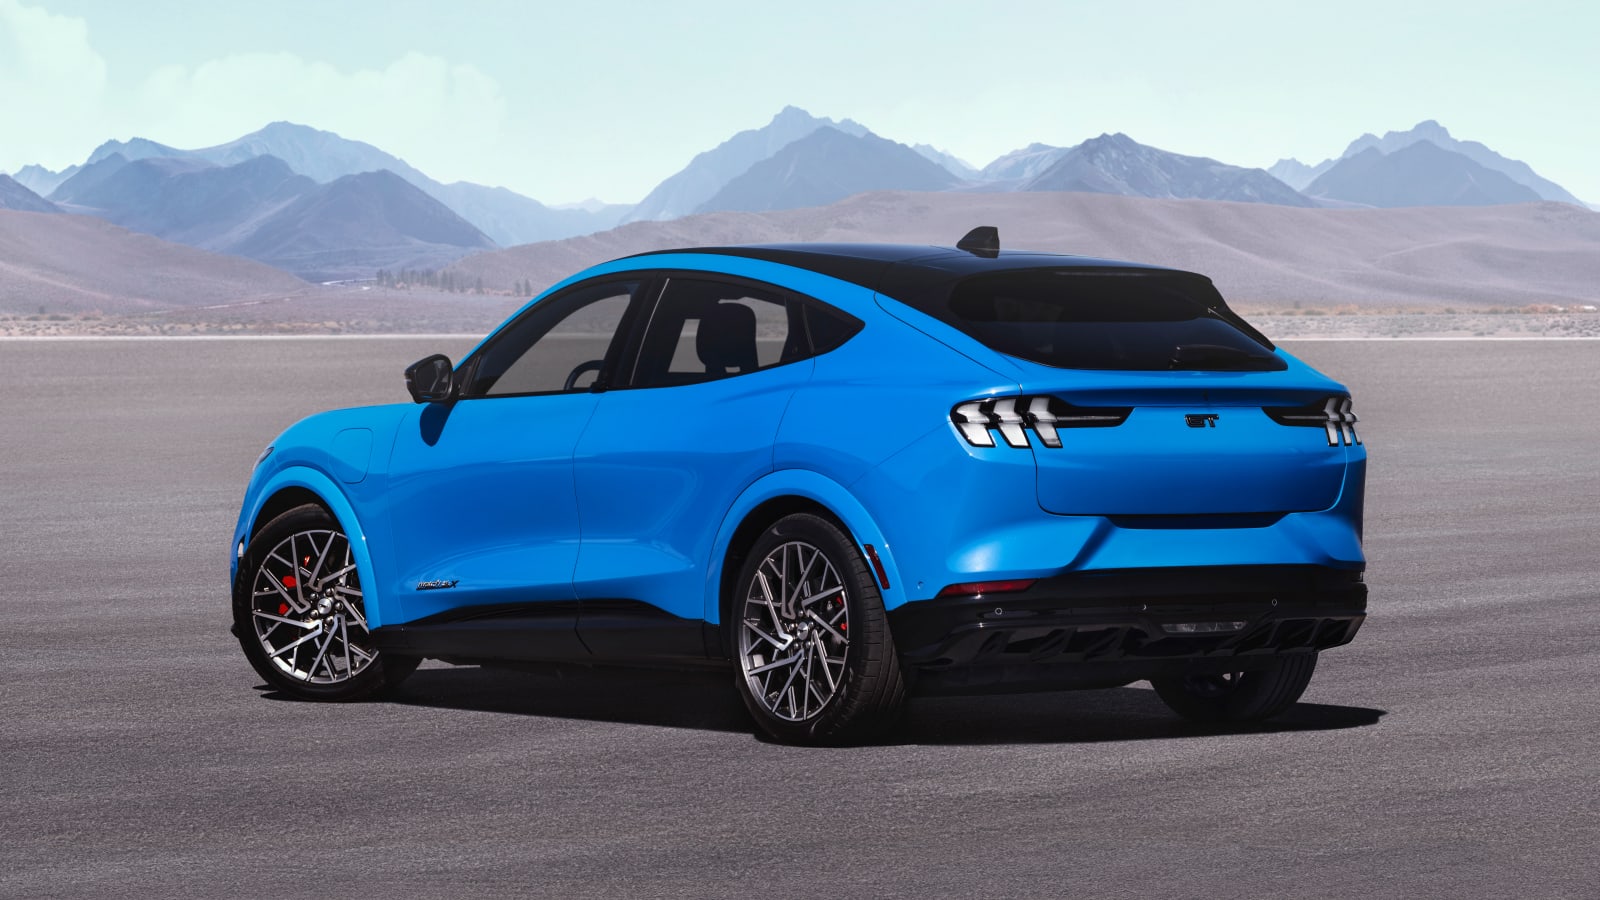 21 Ford Mustang Mach E Gt Final Epa Range Estimates Are Higher Than Predicted